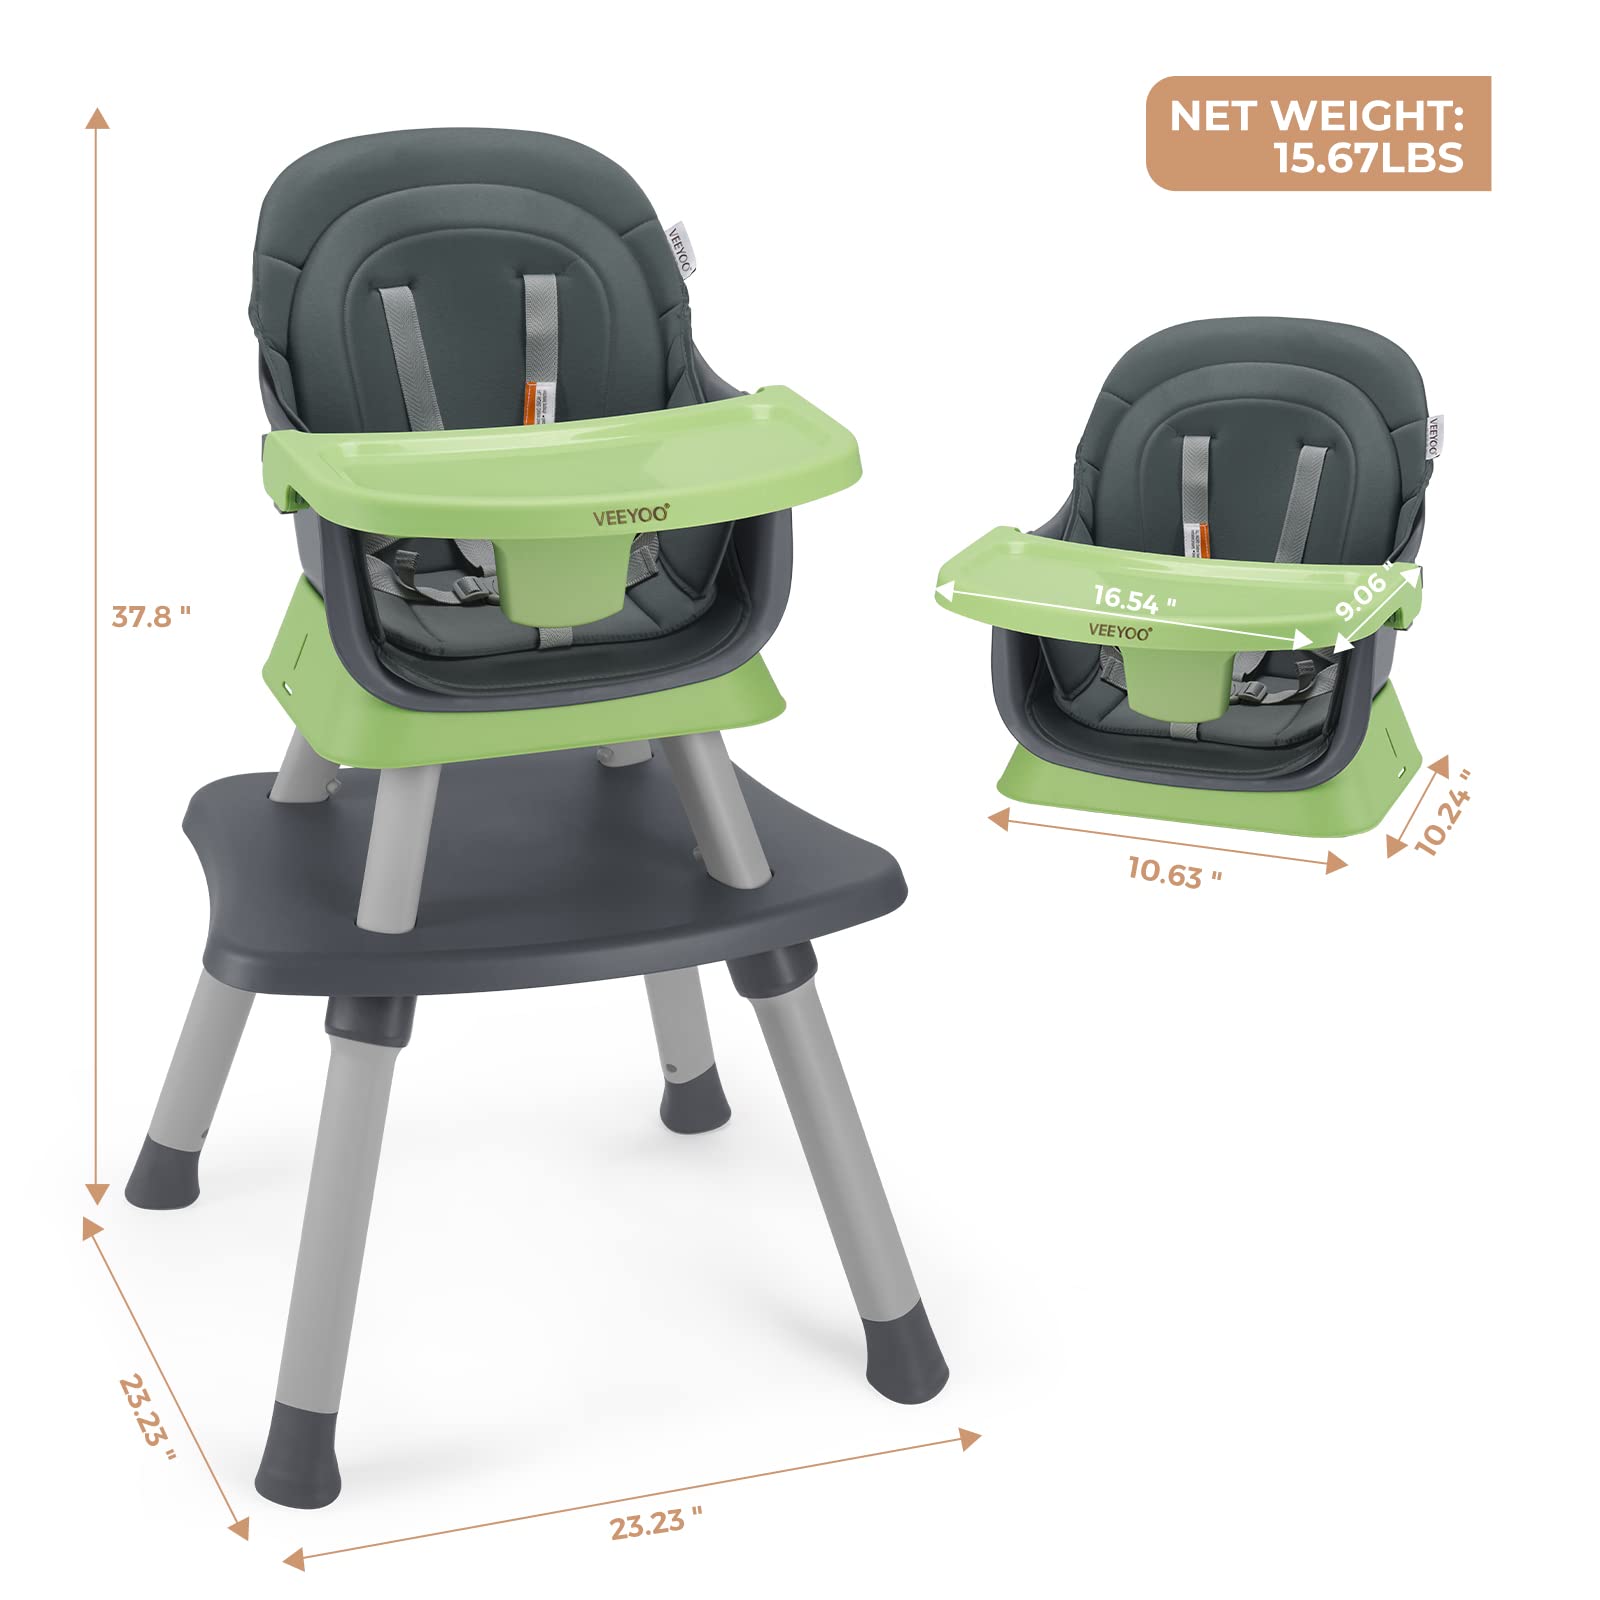 VEEYOO Baby High Chair 6 in 1, Convertible high Chair/Dinning Booster Seat/Toddlers Table & Chair Set with Easy Clearance, Removable Tray, Adjustable Legs, Safety Harness for Girl/boy